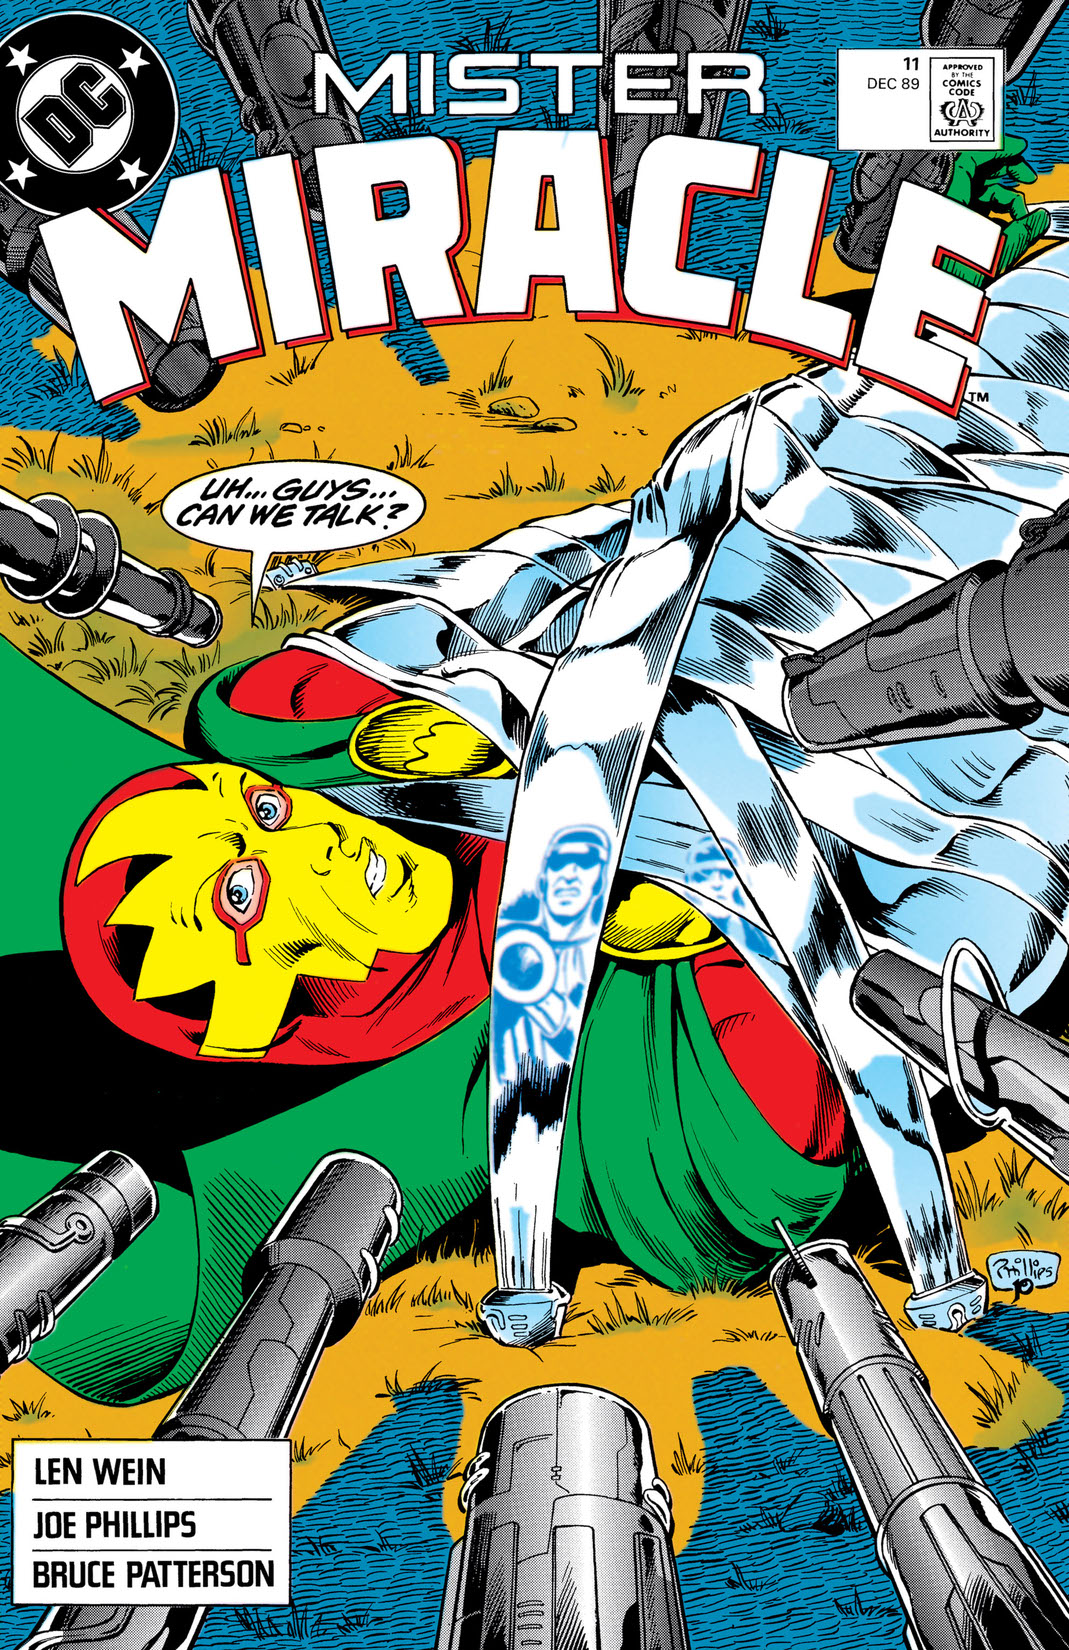 Mister Miracle (1988-) #11 preview images